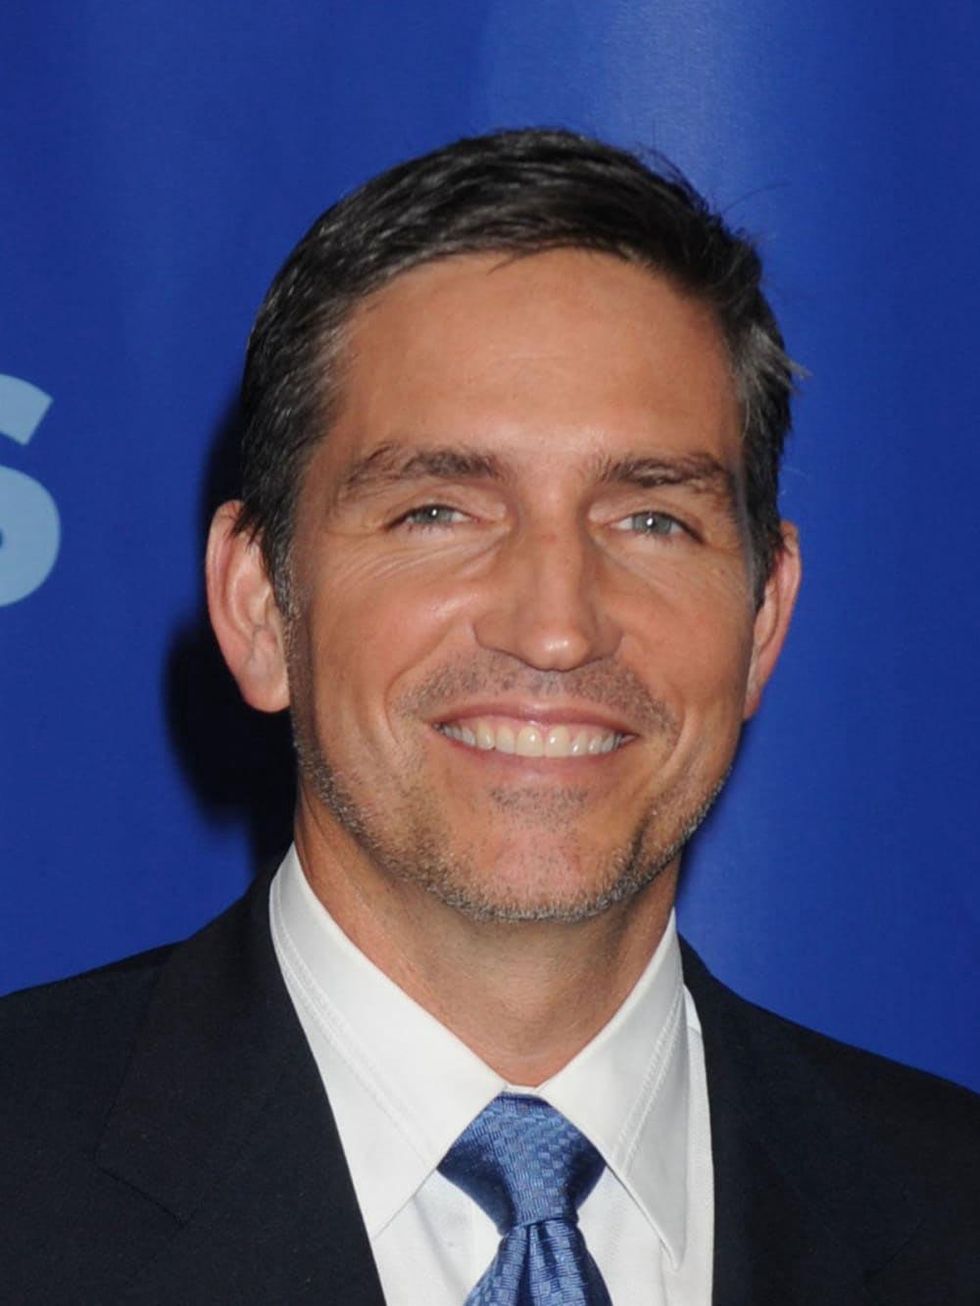 Jim Caviezel starred in 'The Passion of the Christ.'